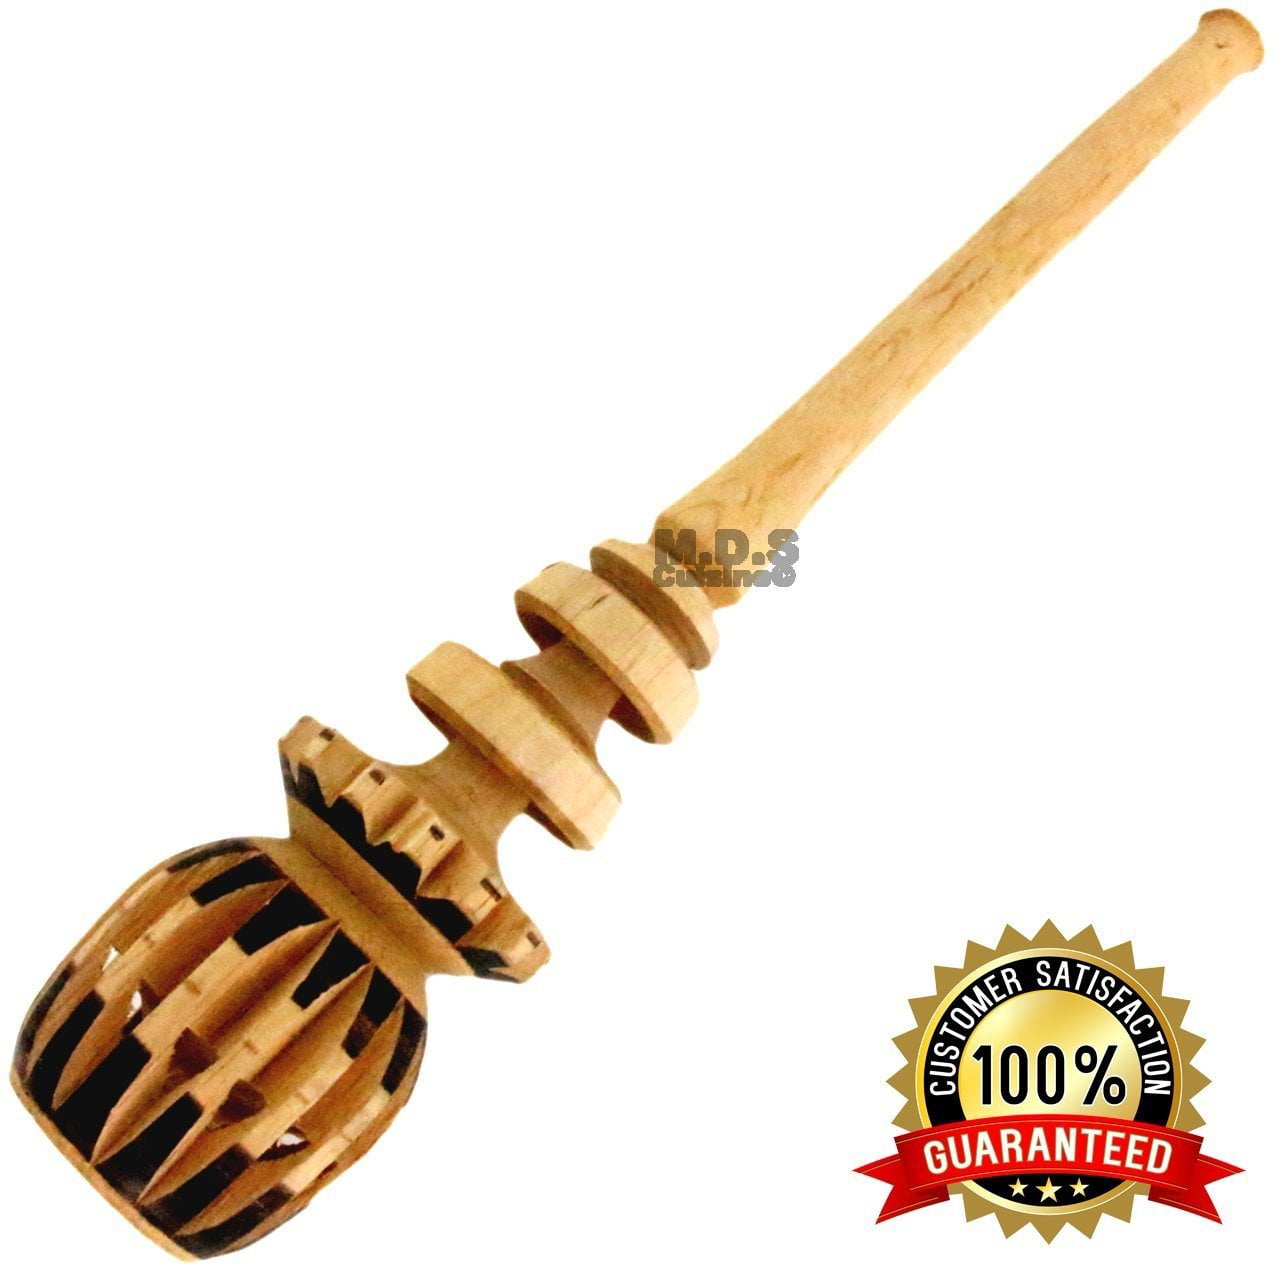 Hand Carved Wooden Molinillo Hot Chocolate Frother